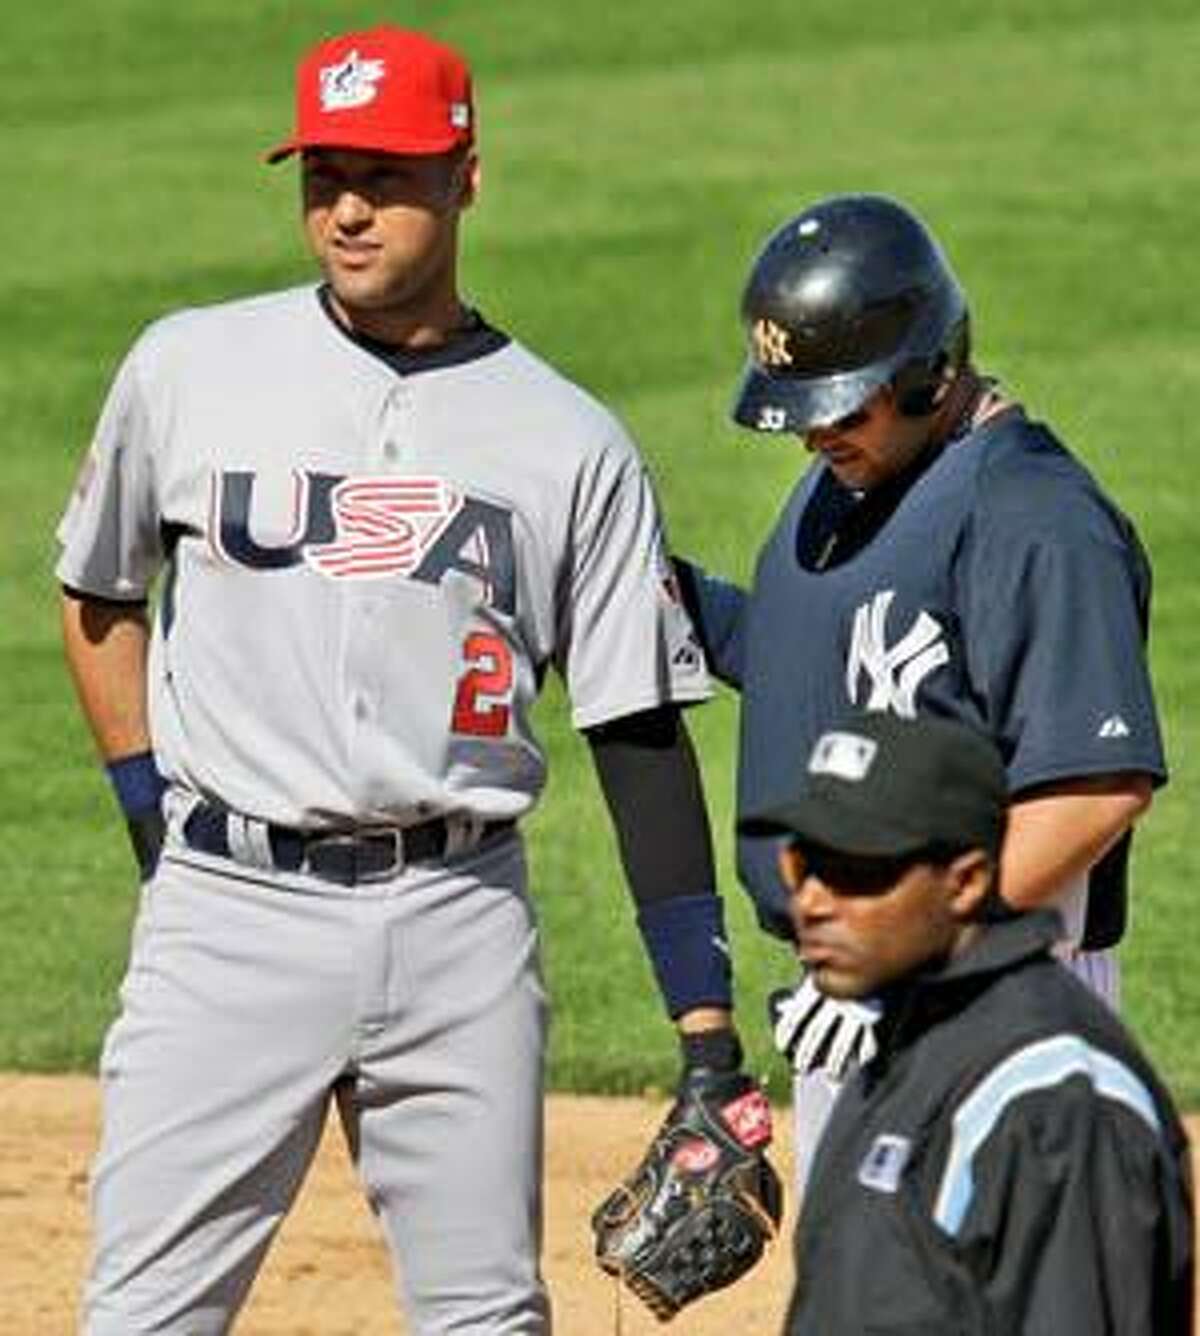 Jeter faces Yankees for first time